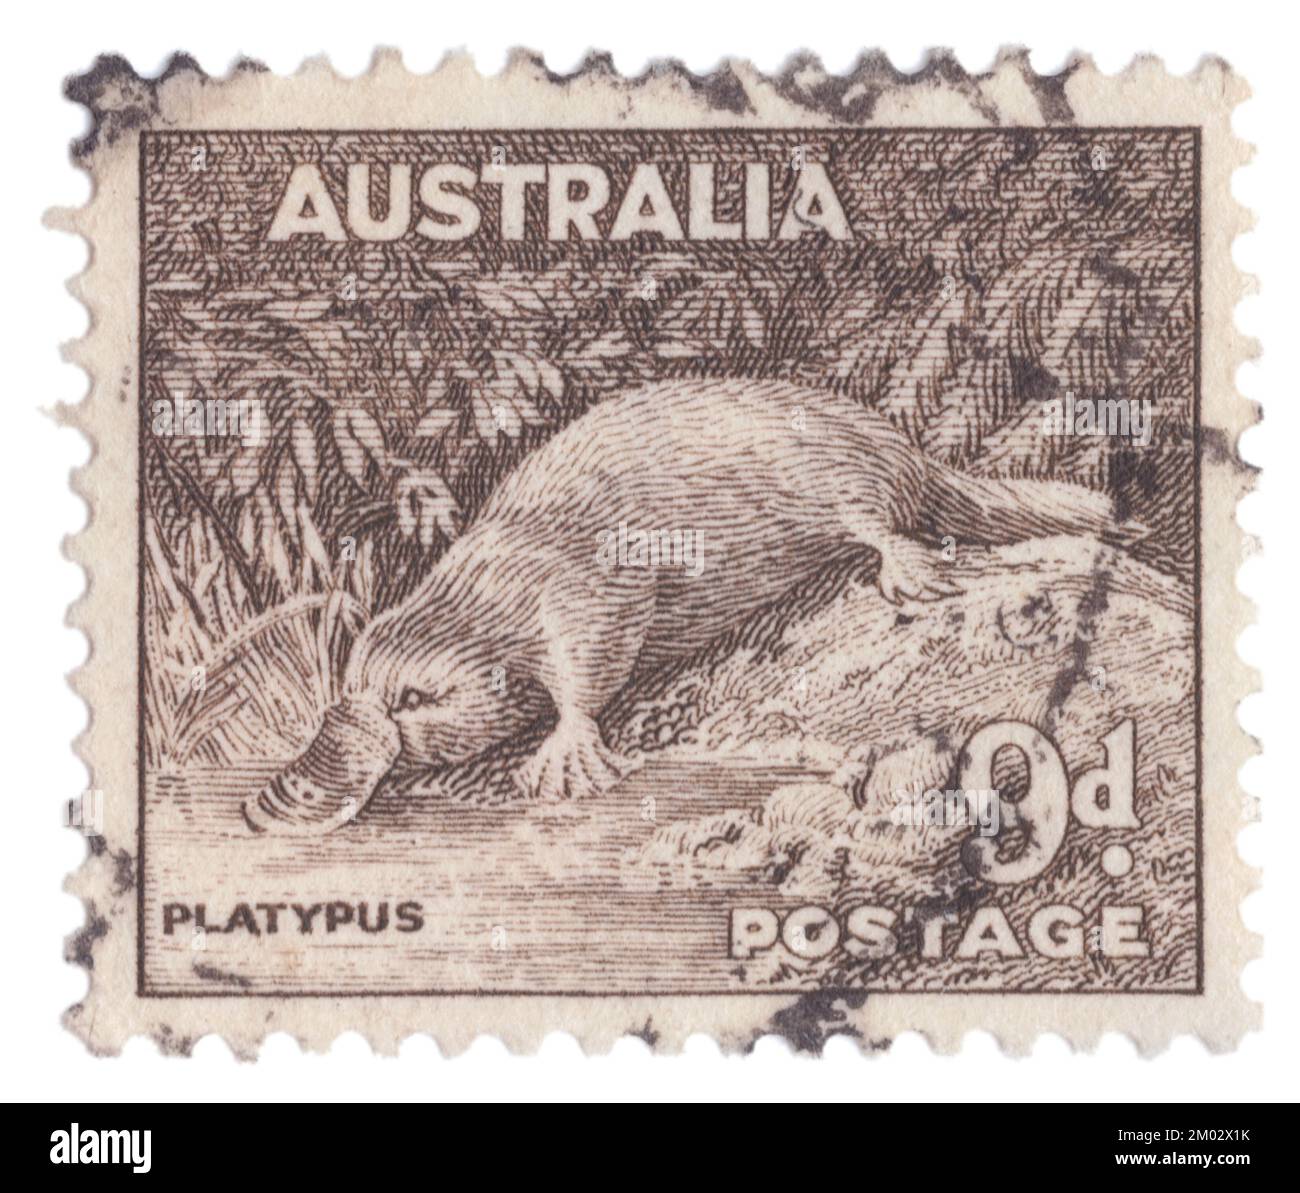 AUSTRALIA — 1943: An 9 pence sepia postage stamp depicting Platypus. King George VI and Queen Elizabeth series. The platypus (Ornithorhynchus anatinus), sometimes referred to as the duck-billed platypus, is a semiaquatic, egg-laying mammal endemic to eastern Australia, including Tasmania. The platypus is the sole living representative or monotypic taxon of its family (Ornithorhynchidae) and genus (Ornithorhynchus), though a number of related species appear in the fossil record Stock Photo